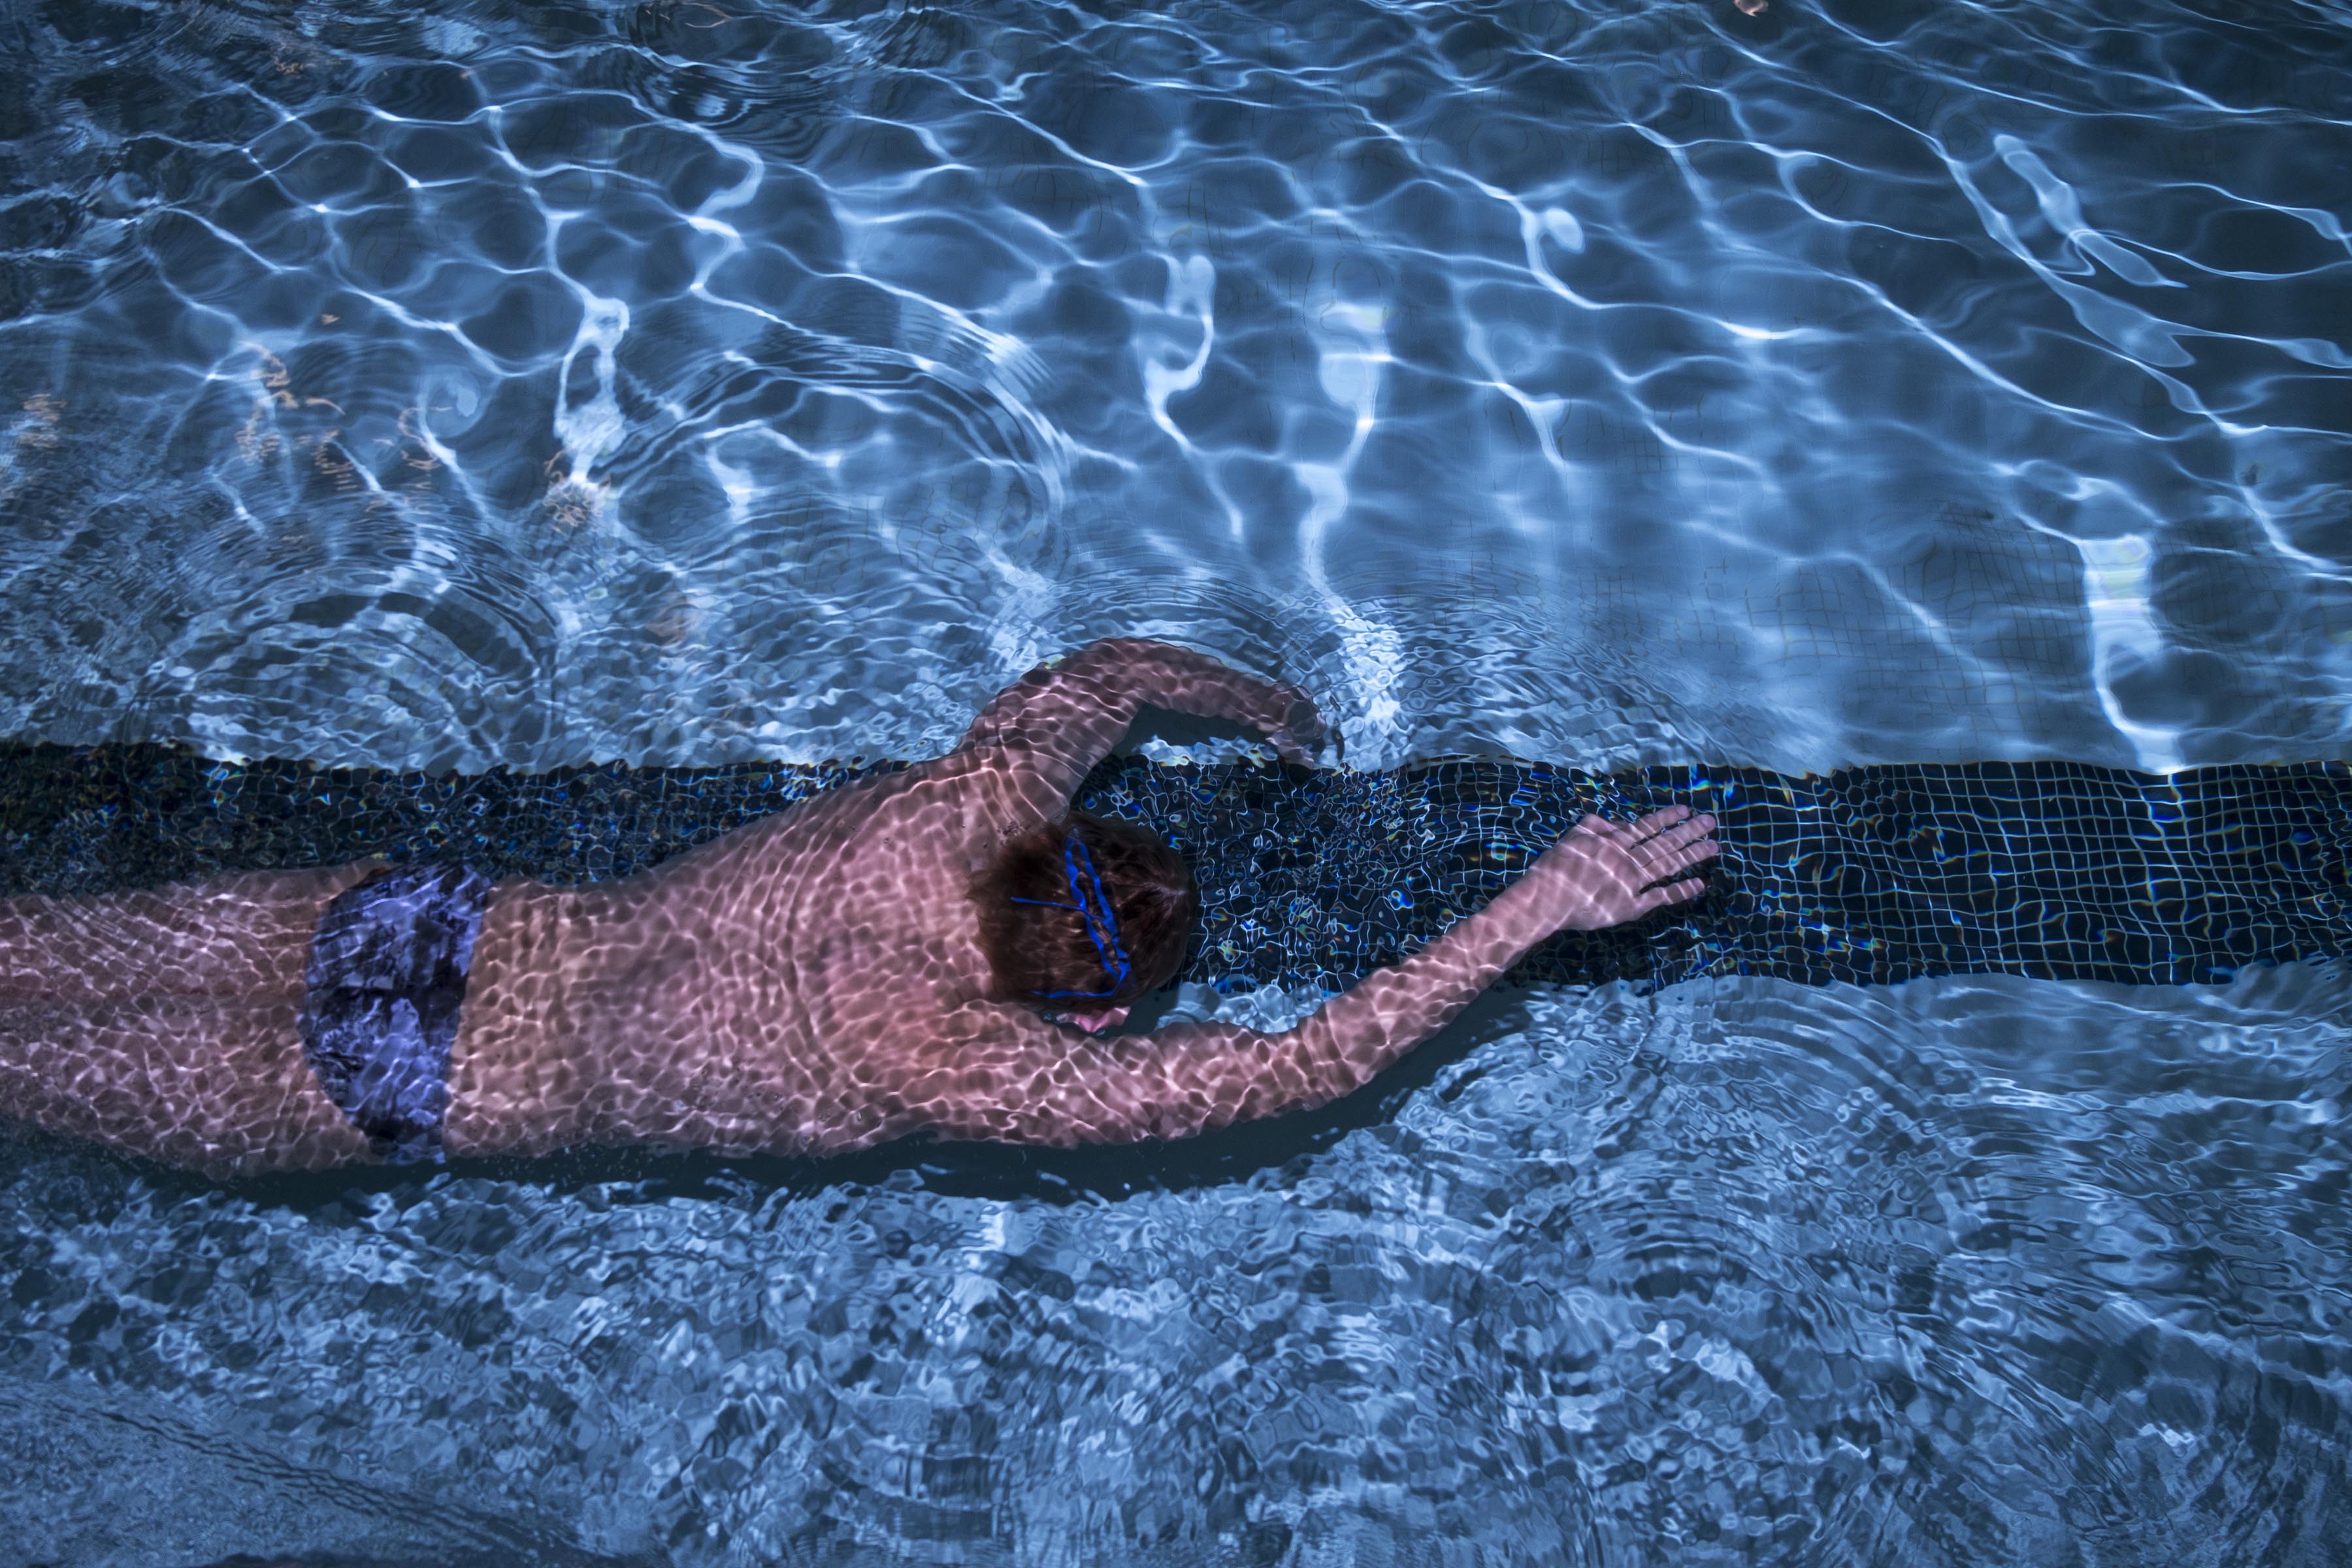 A photograph of a man in a speedo swimming in a pool, shot from above.